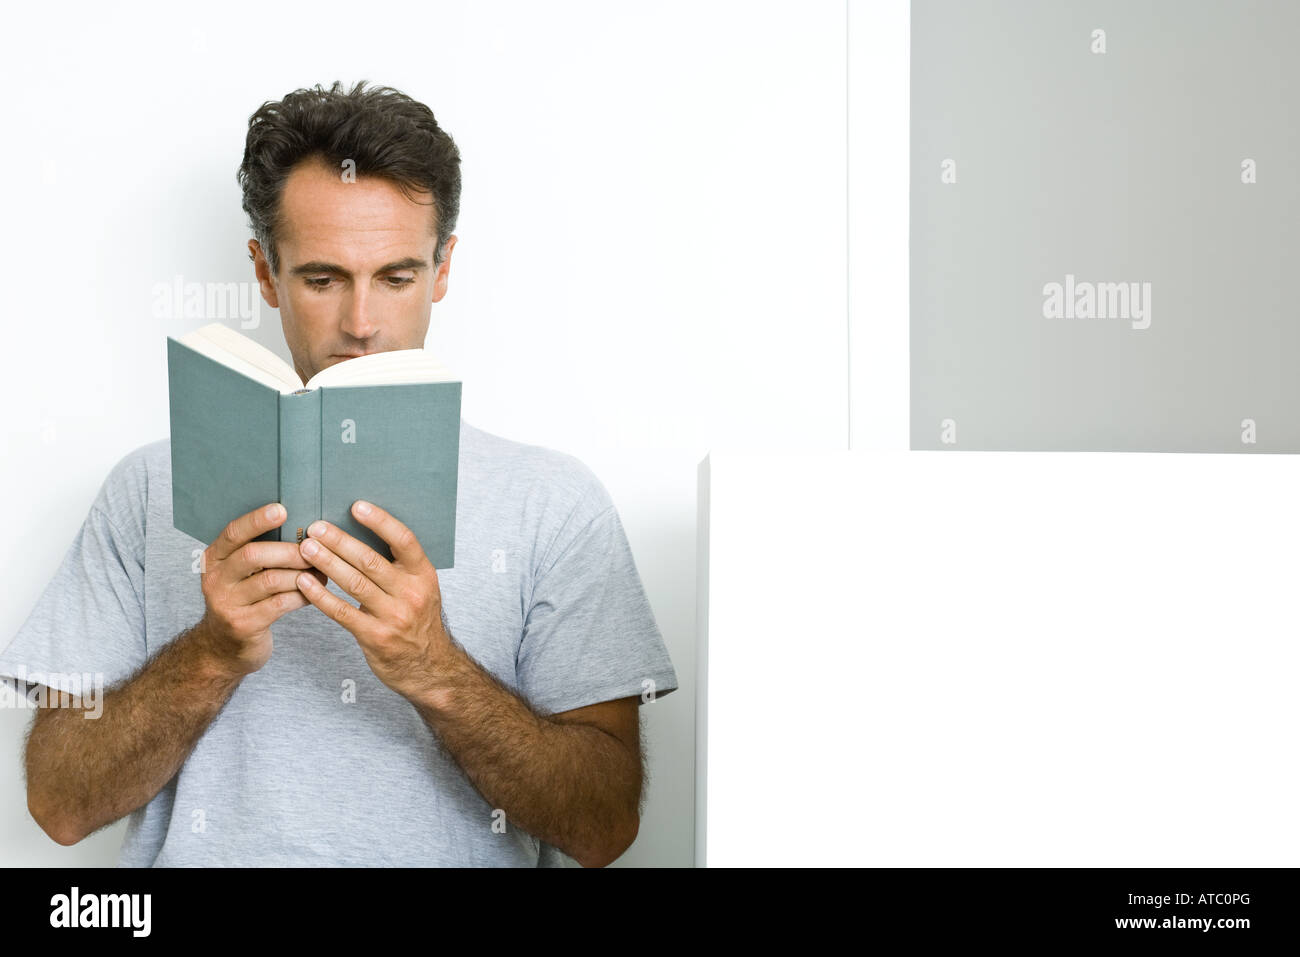 Man reading book, front view Stock Photo